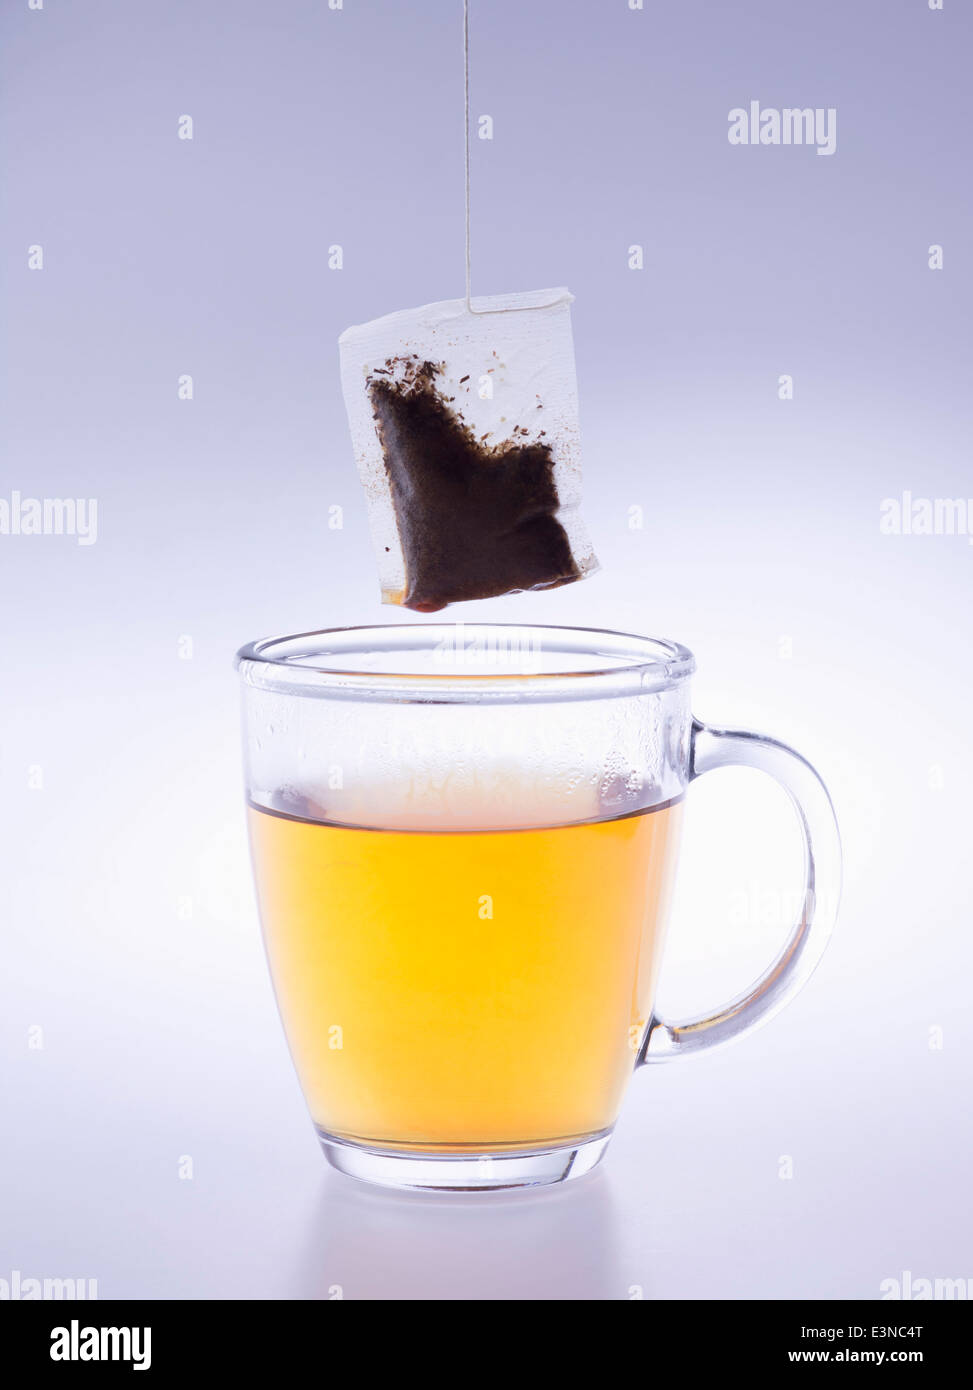 Herbal tea cup and teabag over blue background Stock Photo